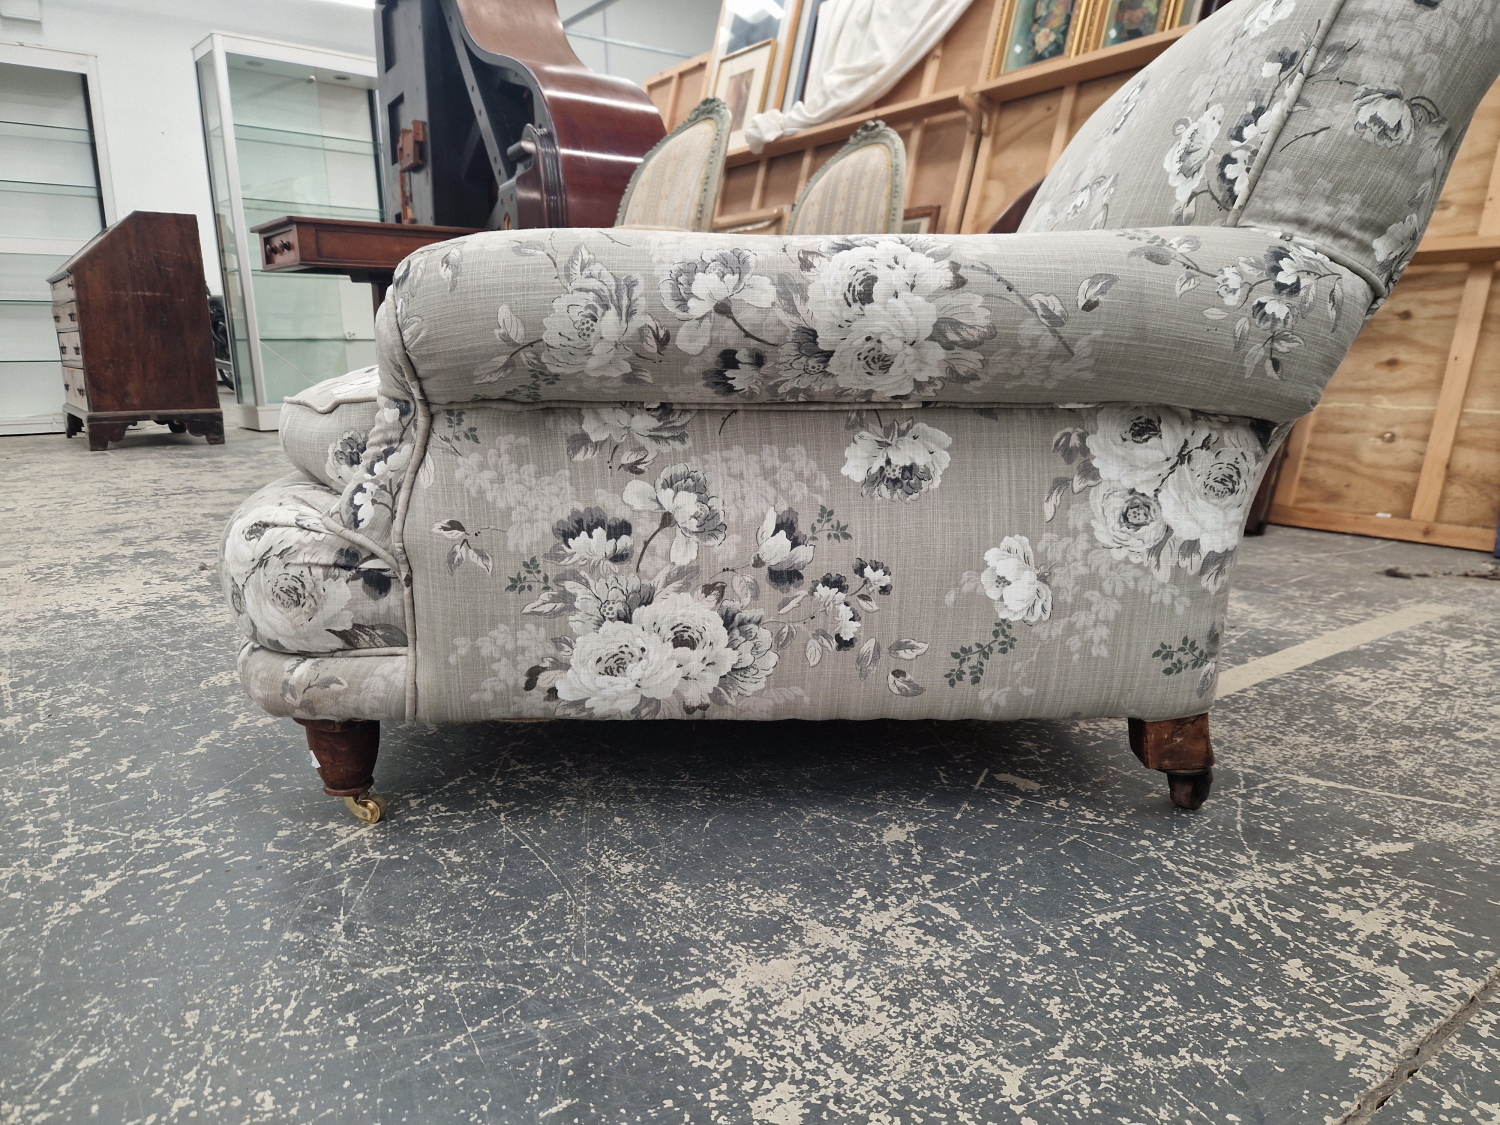 A HOWARD TYPE ARMCHAIR BY WILLIAM BIRCH UPHOLSTERED IN GREY FLORAL MATERIAL, ONE MAHOGANY BACK LEG - Image 2 of 6